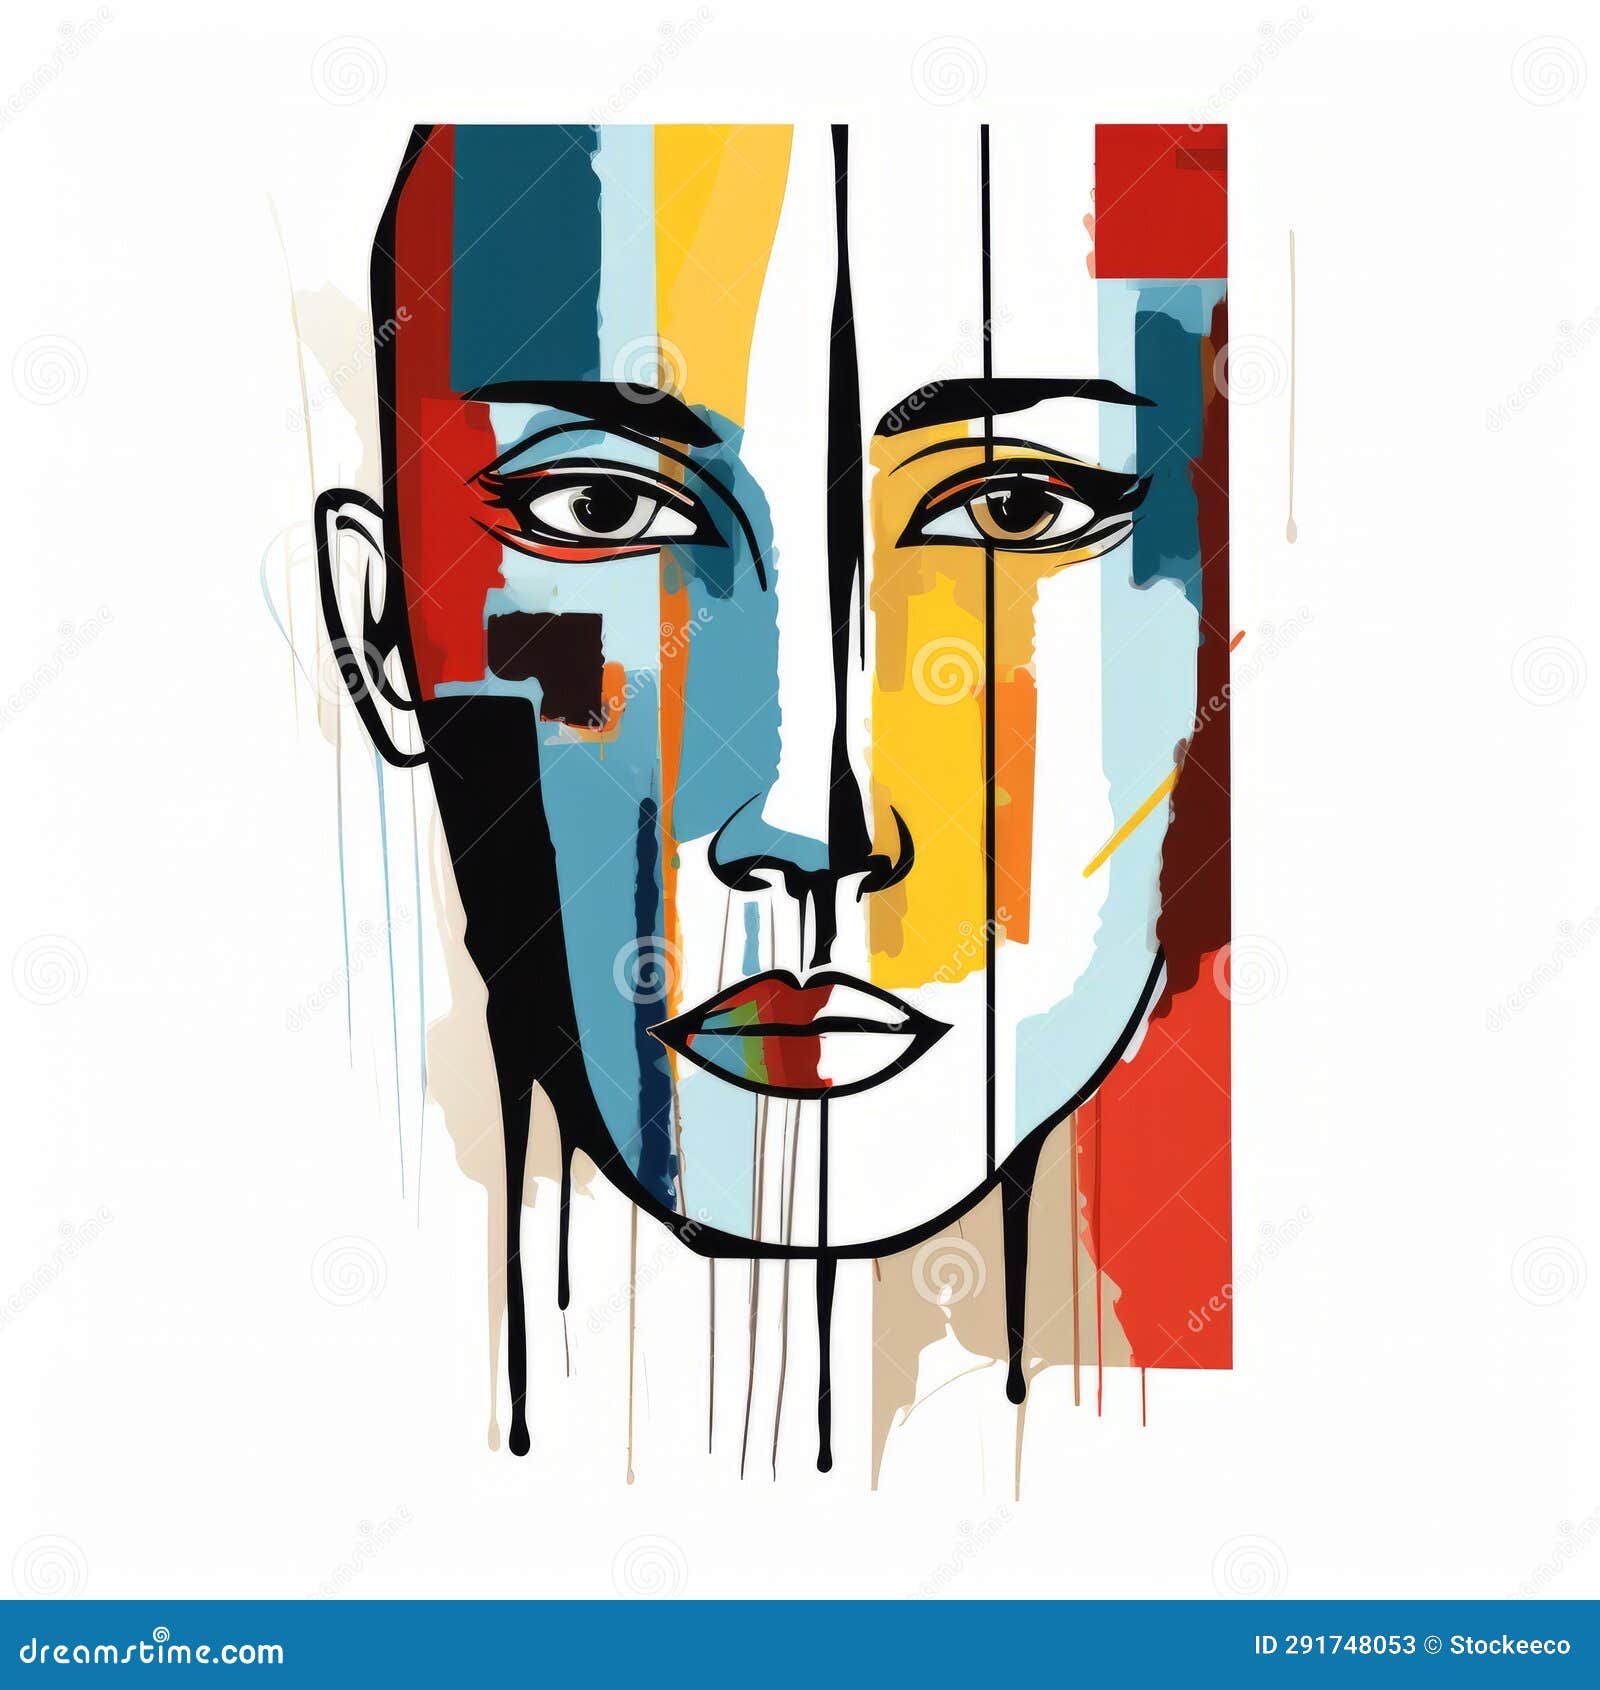 abstract stripes  : artistic expressionism of a woman's face